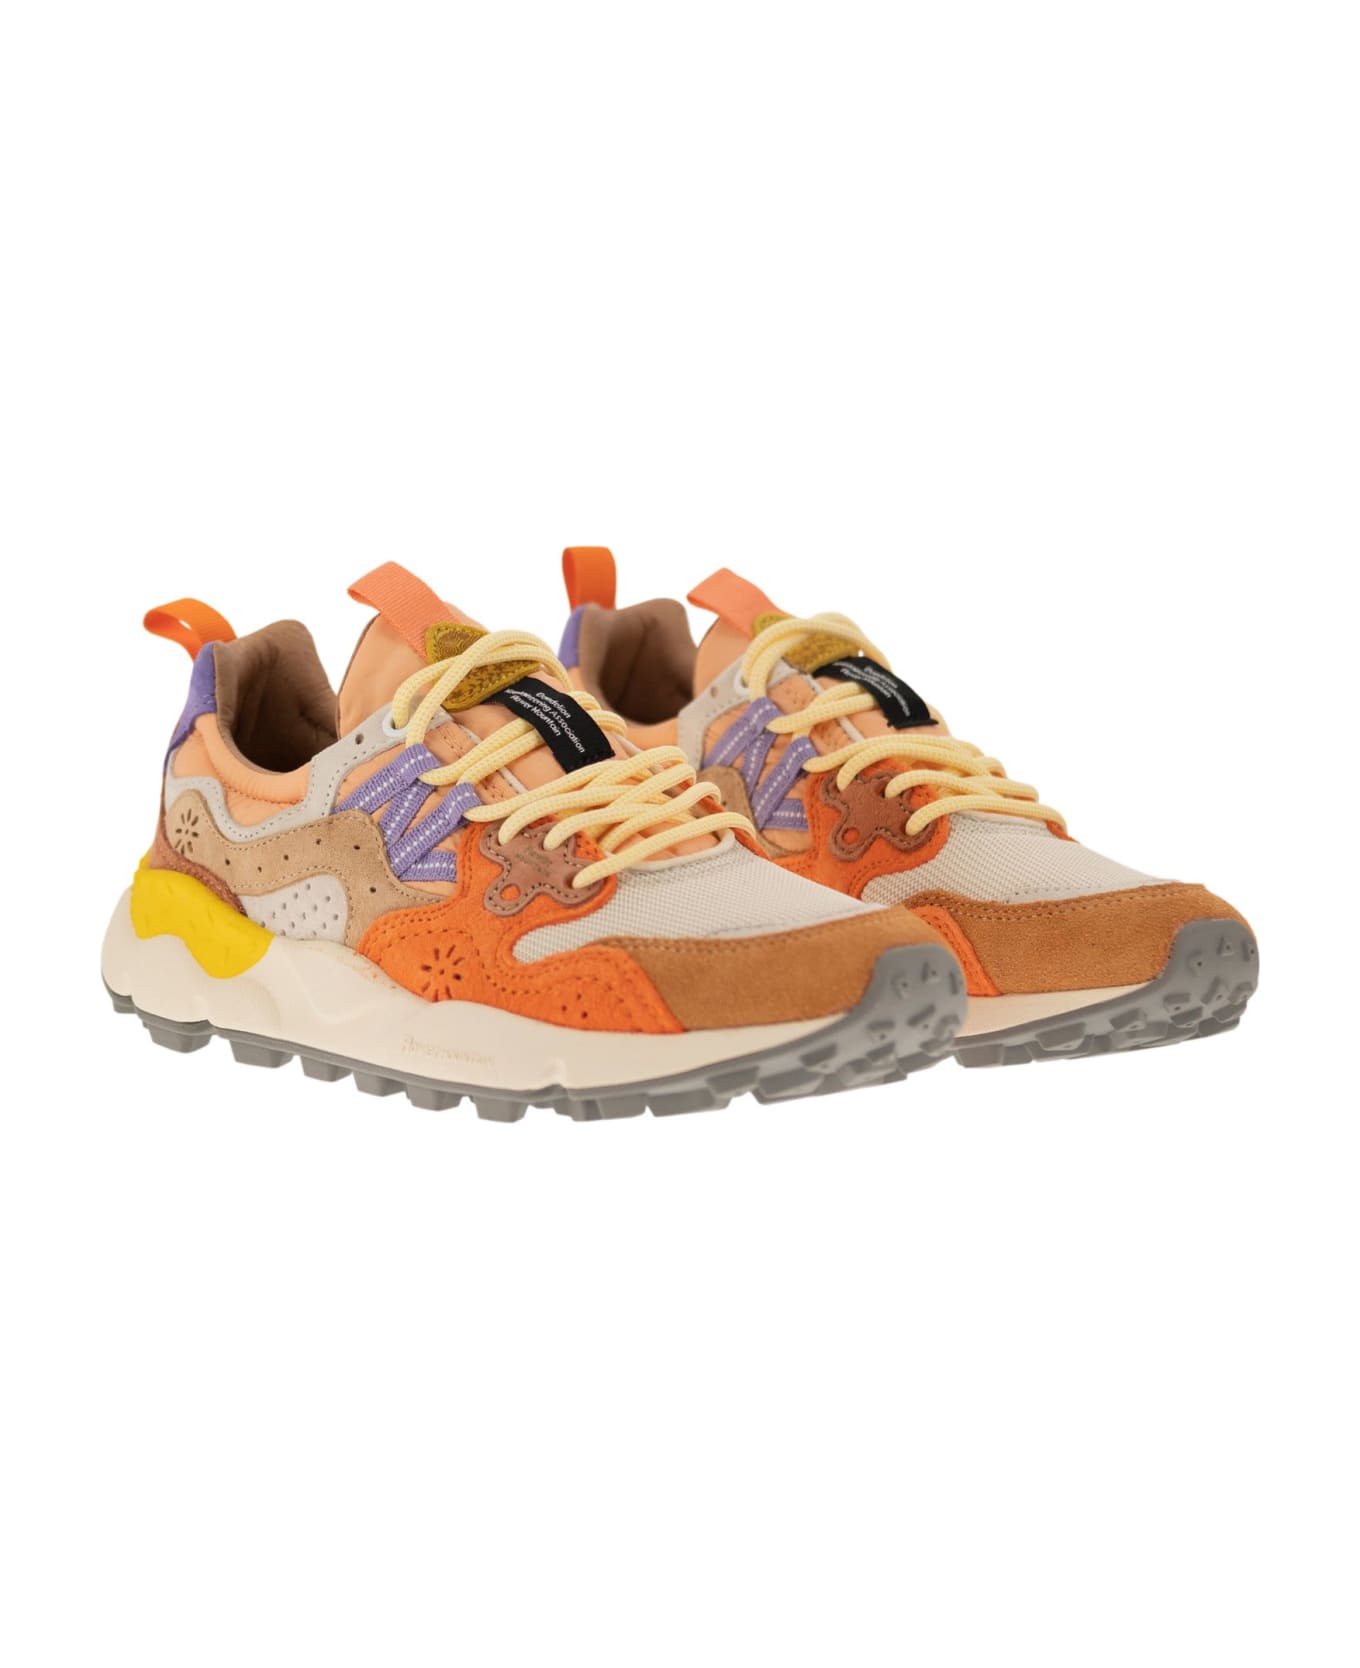 Flower Mountain Yamano 3 - Sneakers - Multicolor